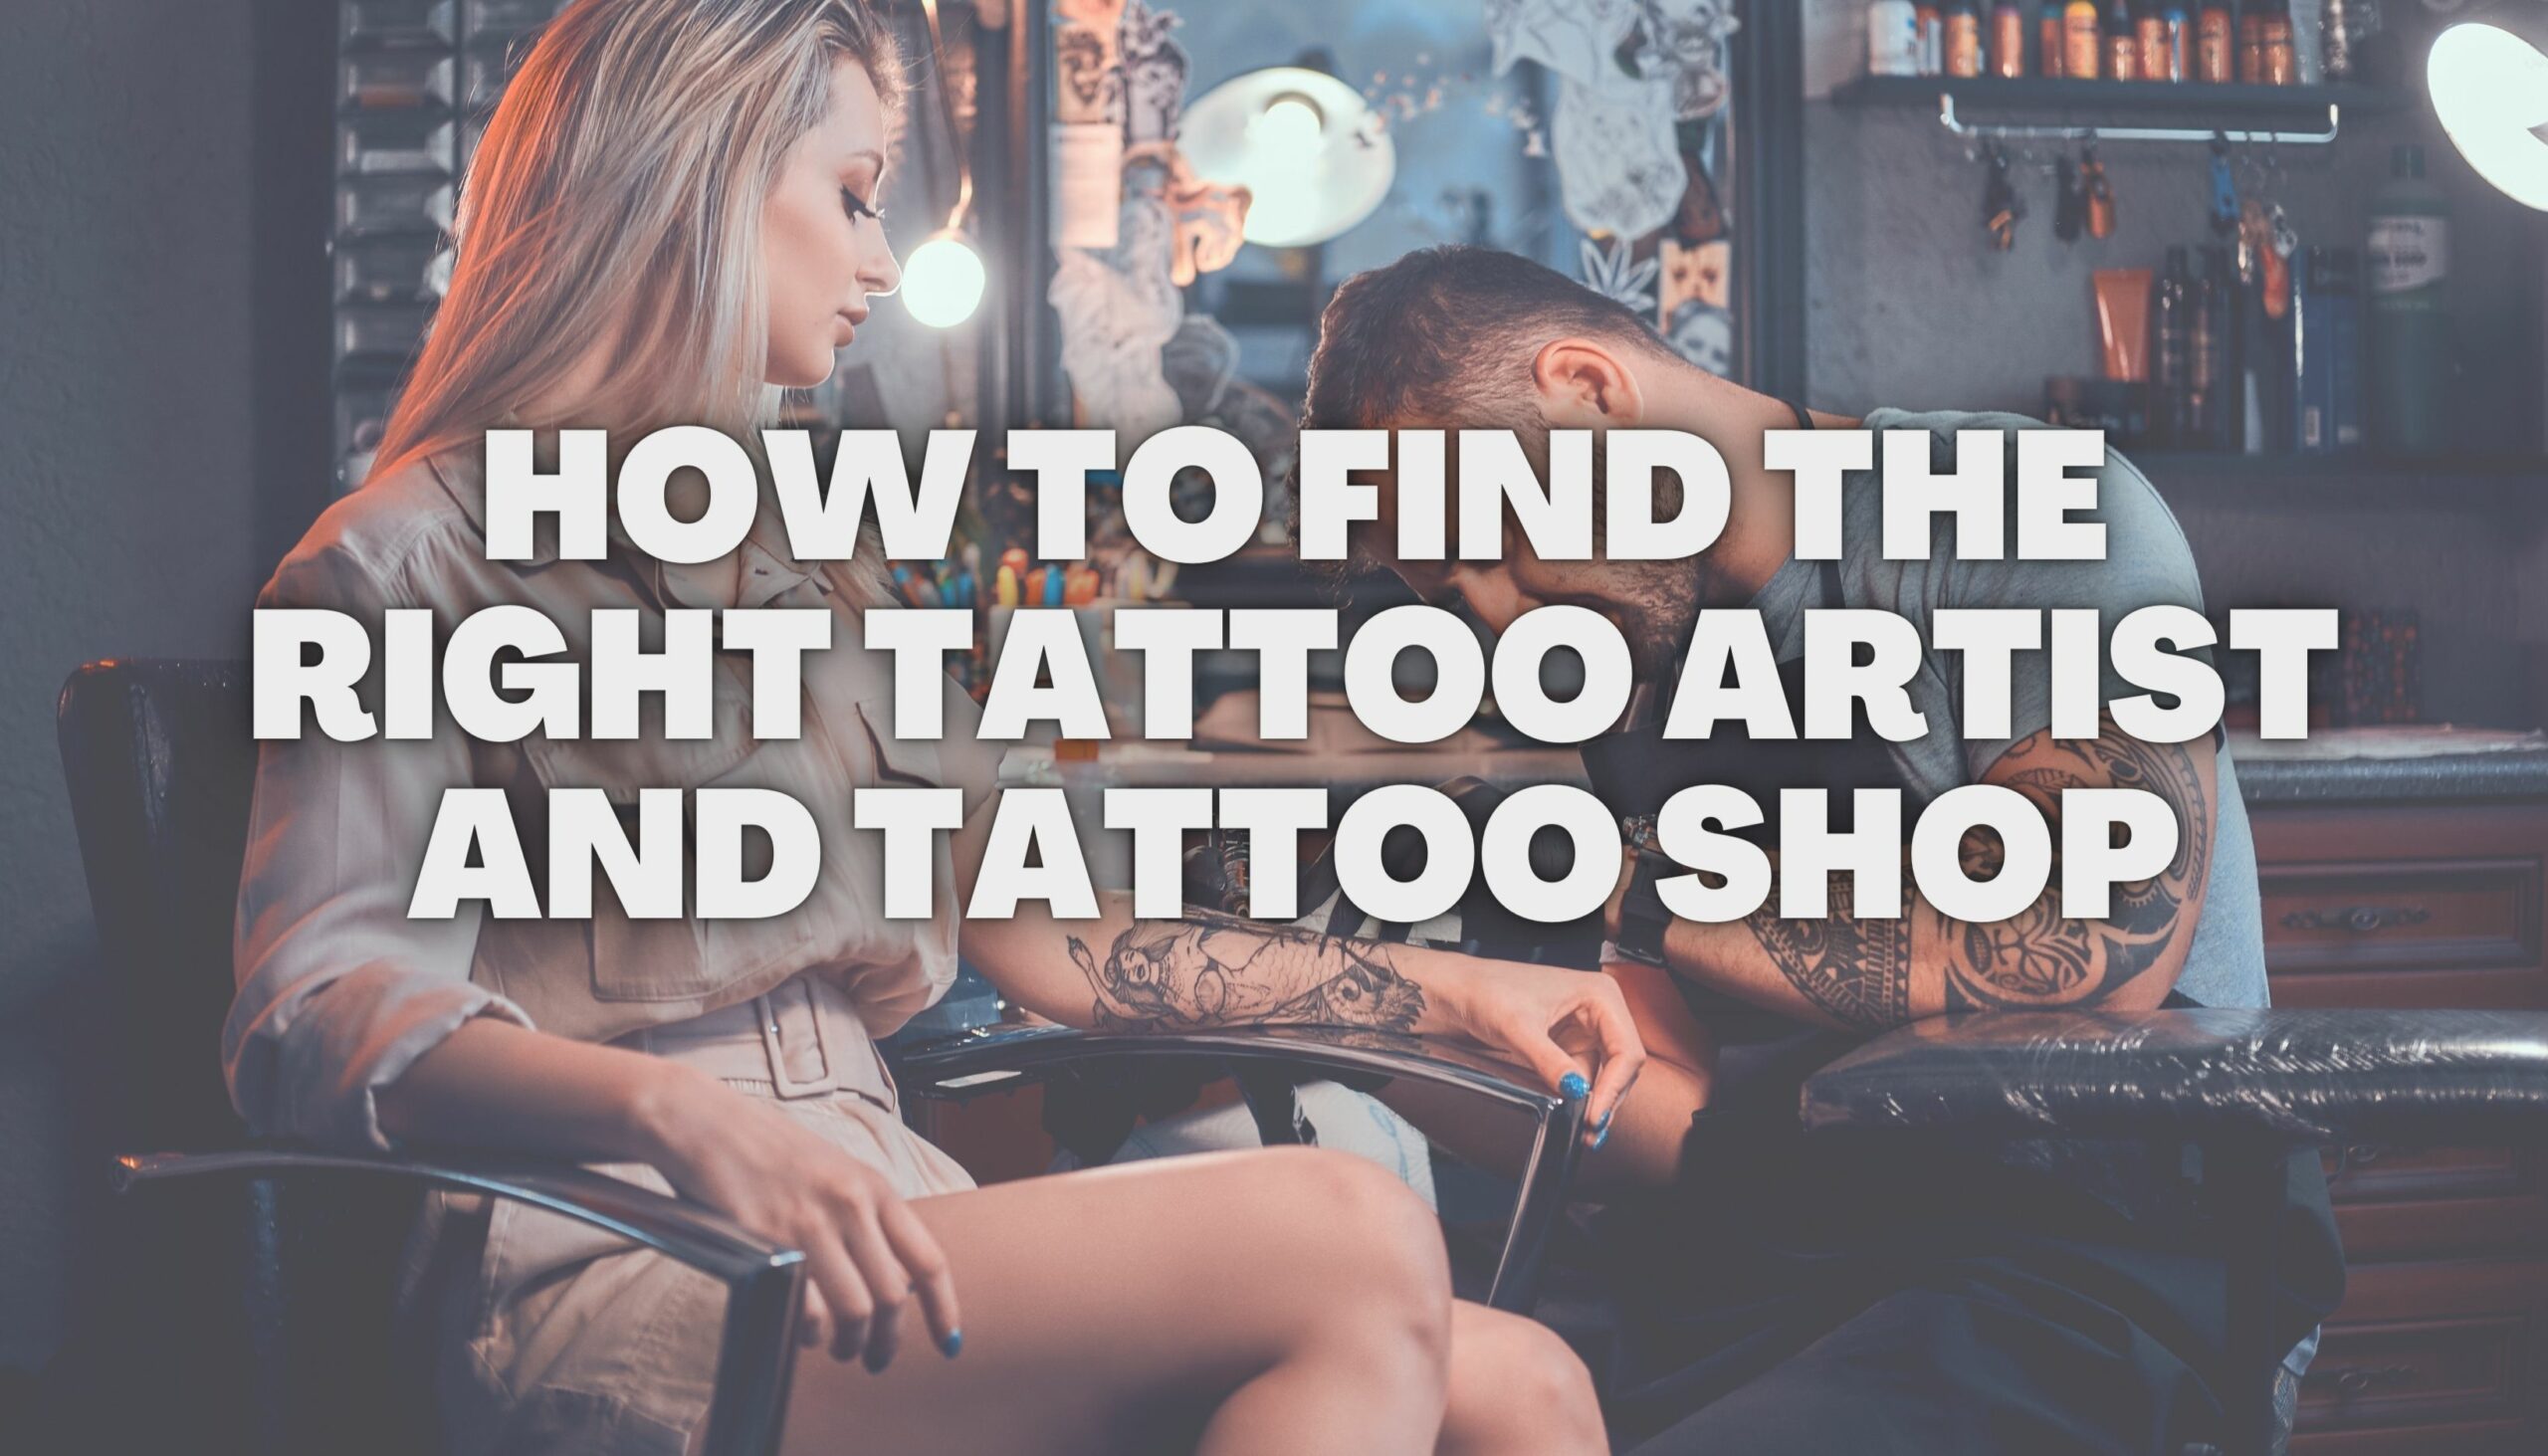 How to Find the Right Tattoo Artist and Tattoo Shop - Ink Different Tattoo School